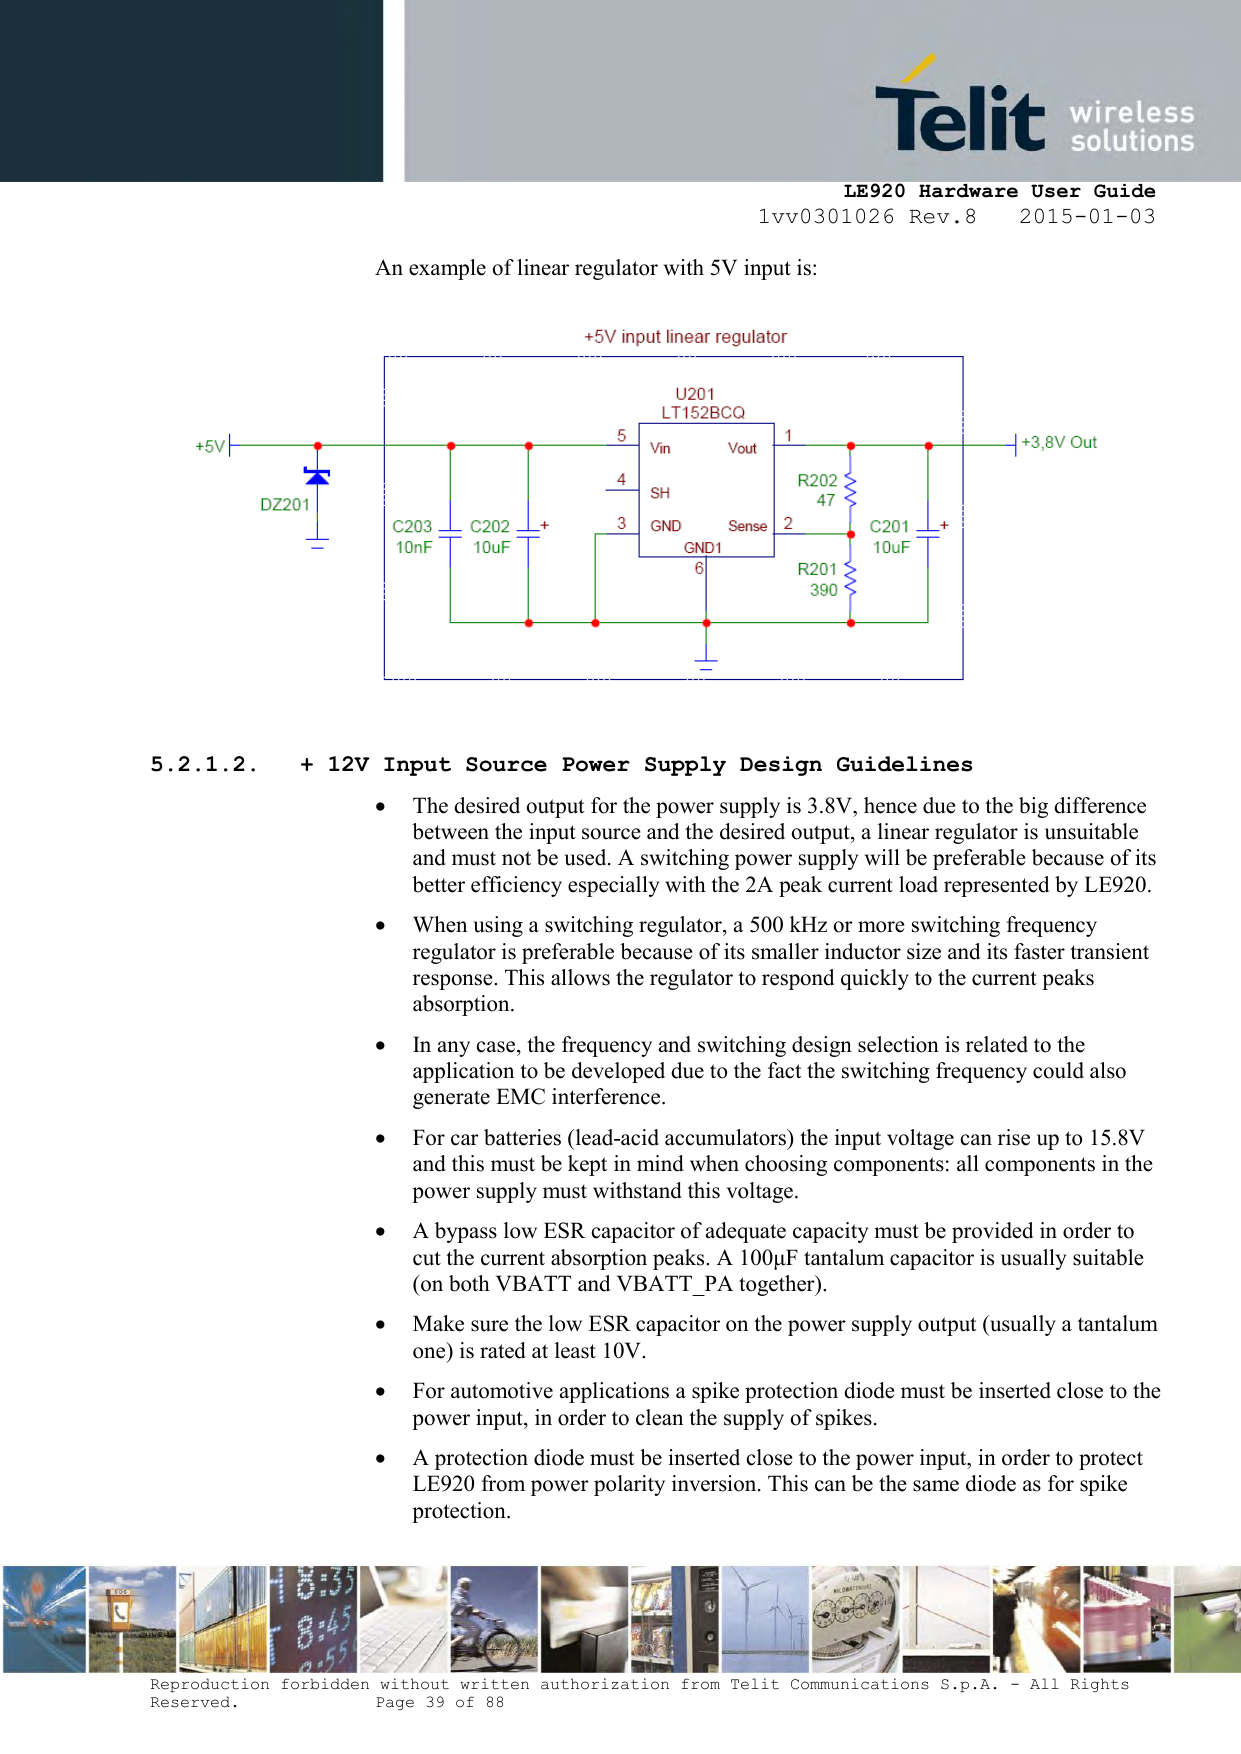     LE920 Hardware User Guide 1vv0301026 Rev.8   2015-01-03 Reproduction forbidden without written authorization from Telit Communications S.p.A. - All Rights Reserved.    Page 39 of 88  An example of linear regulator with 5V input is:  5.2.1.2. + 12V Input Source Power Supply Design Guidelines  The desired output for the power supply is 3.8V, hence due to the big difference between the input source and the desired output, a linear regulator is unsuitable and must not be used. A switching power supply will be preferable because of its better efficiency especially with the 2A peak current load represented by LE920.   When using a switching regulator, a 500 kHz or more switching frequency regulator is preferable because of its smaller inductor size and its faster transient response. This allows the regulator to respond quickly to the current peaks absorption.   In any case, the frequency and switching design selection is related to the application to be developed due to the fact the switching frequency could also generate EMC interference.  For car batteries (lead-acid accumulators) the input voltage can rise up to 15.8V and this must be kept in mind when choosing components: all components in the power supply must withstand this voltage.  A bypass low ESR capacitor of adequate capacity must be provided in order to cut the current absorption peaks. A 100μF tantalum capacitor is usually suitable (on both VBATT and VBATT_PA together).  Make sure the low ESR capacitor on the power supply output (usually a tantalum one) is rated at least 10V.  For automotive applications a spike protection diode must be inserted close to the power input, in order to clean the supply of spikes.   A protection diode must be inserted close to the power input, in order to protect LE920 from power polarity inversion. This can be the same diode as for spike protection. 